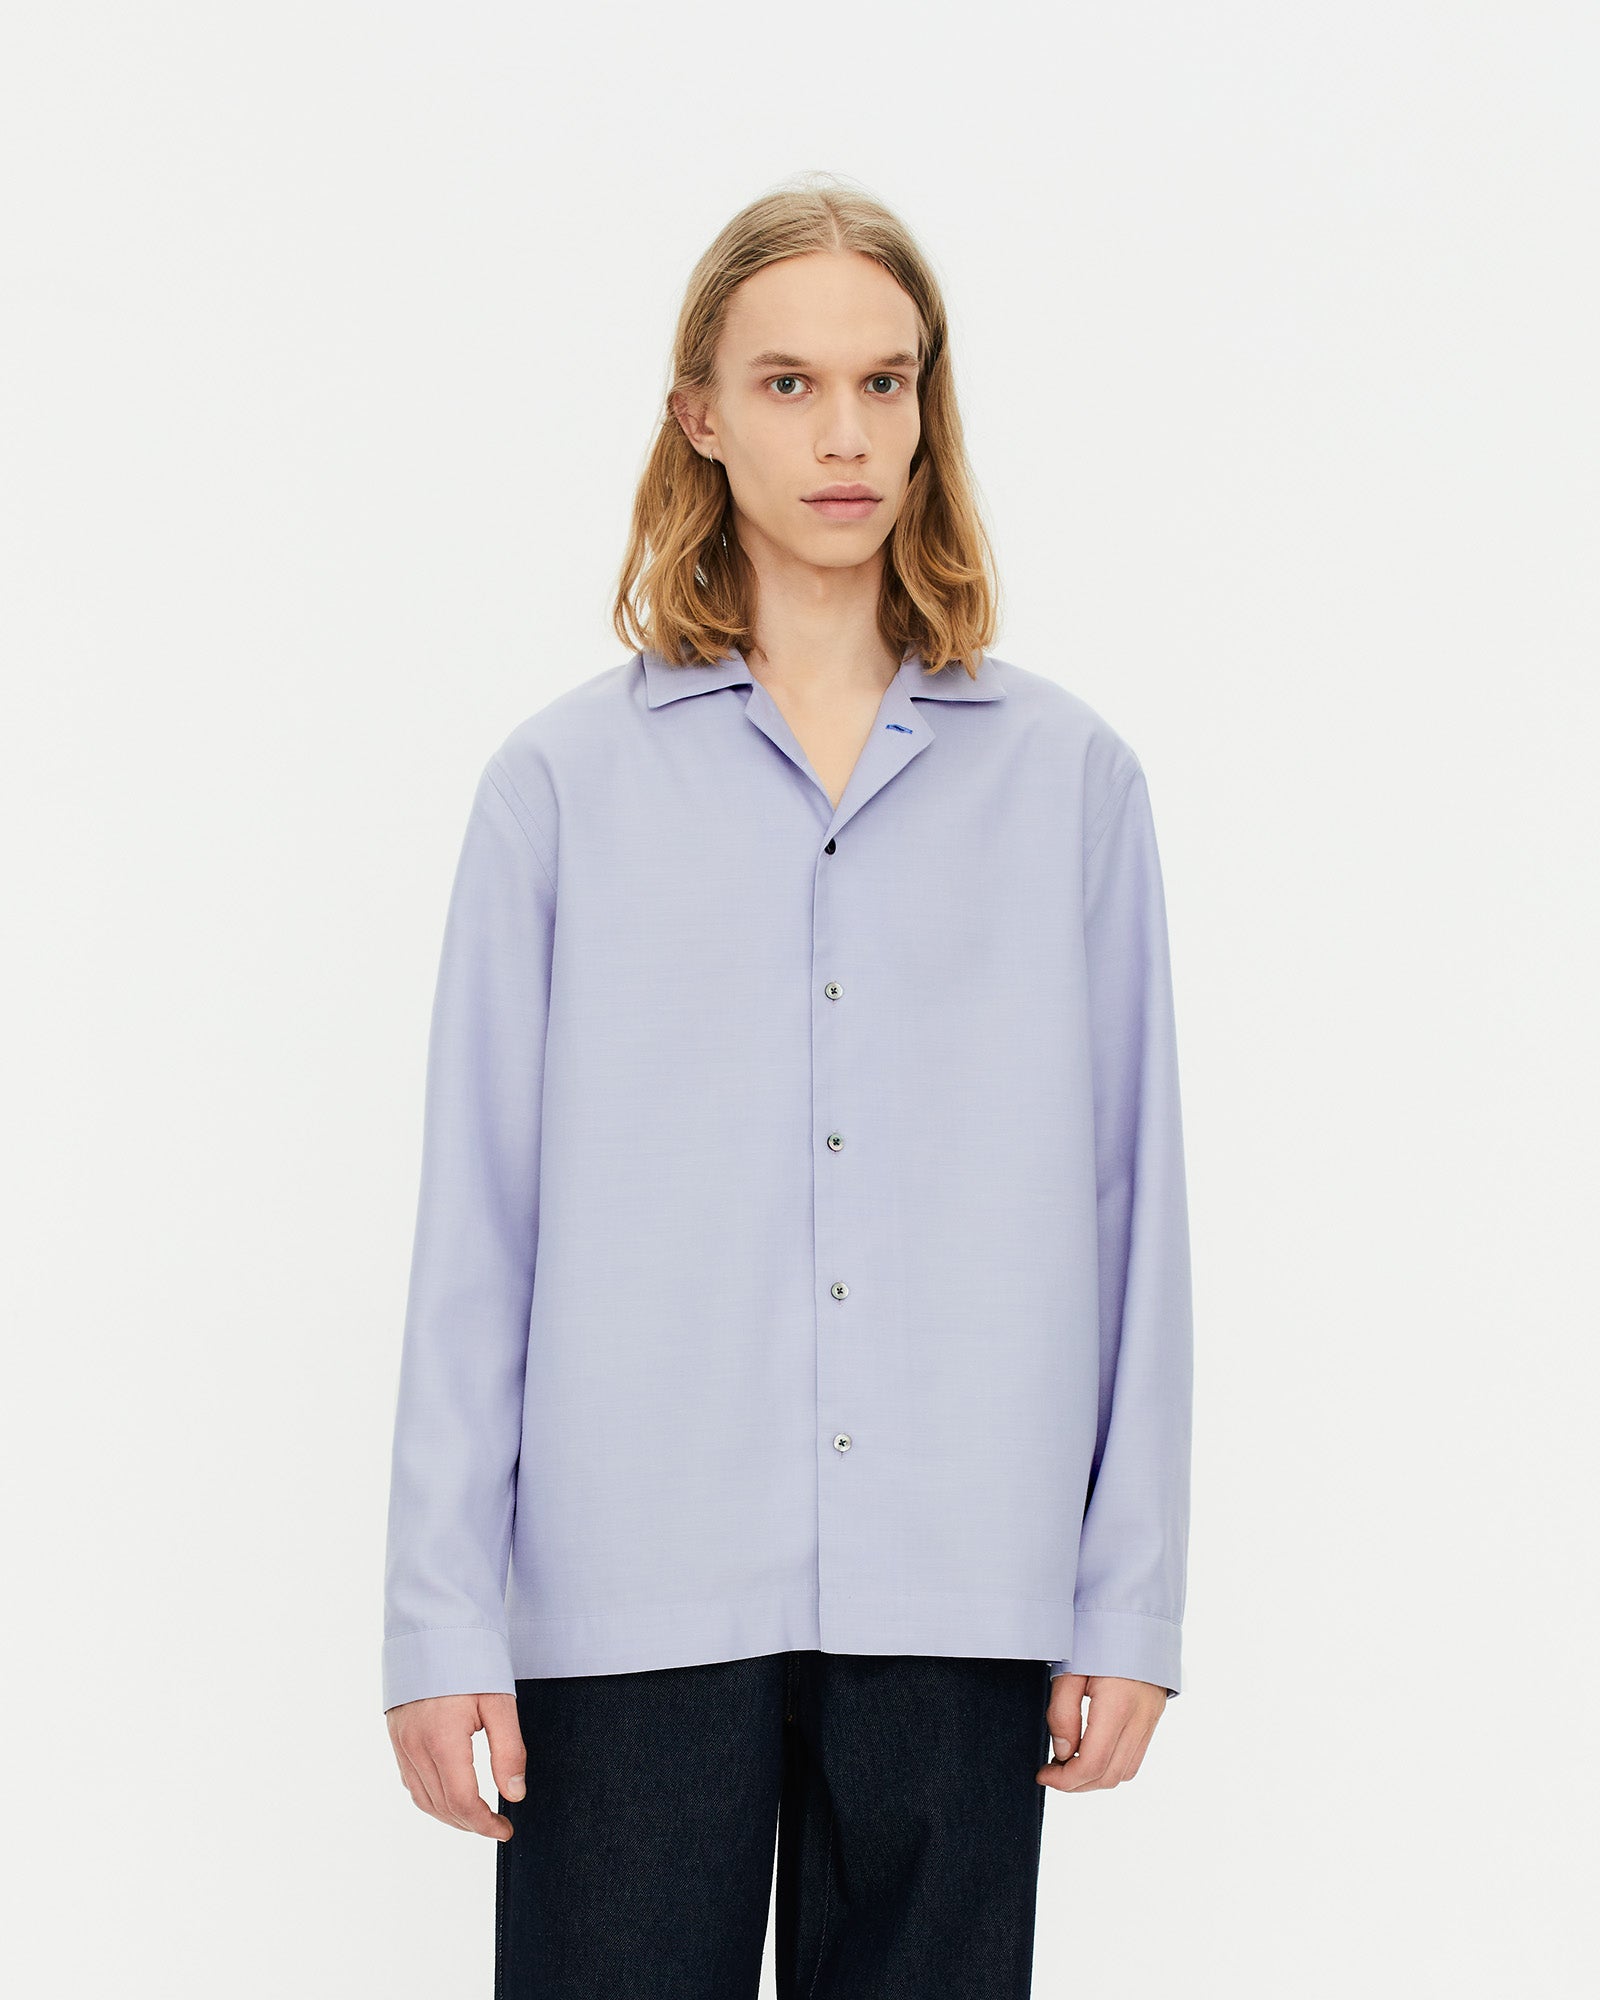 Unisex shirt with convertible collar